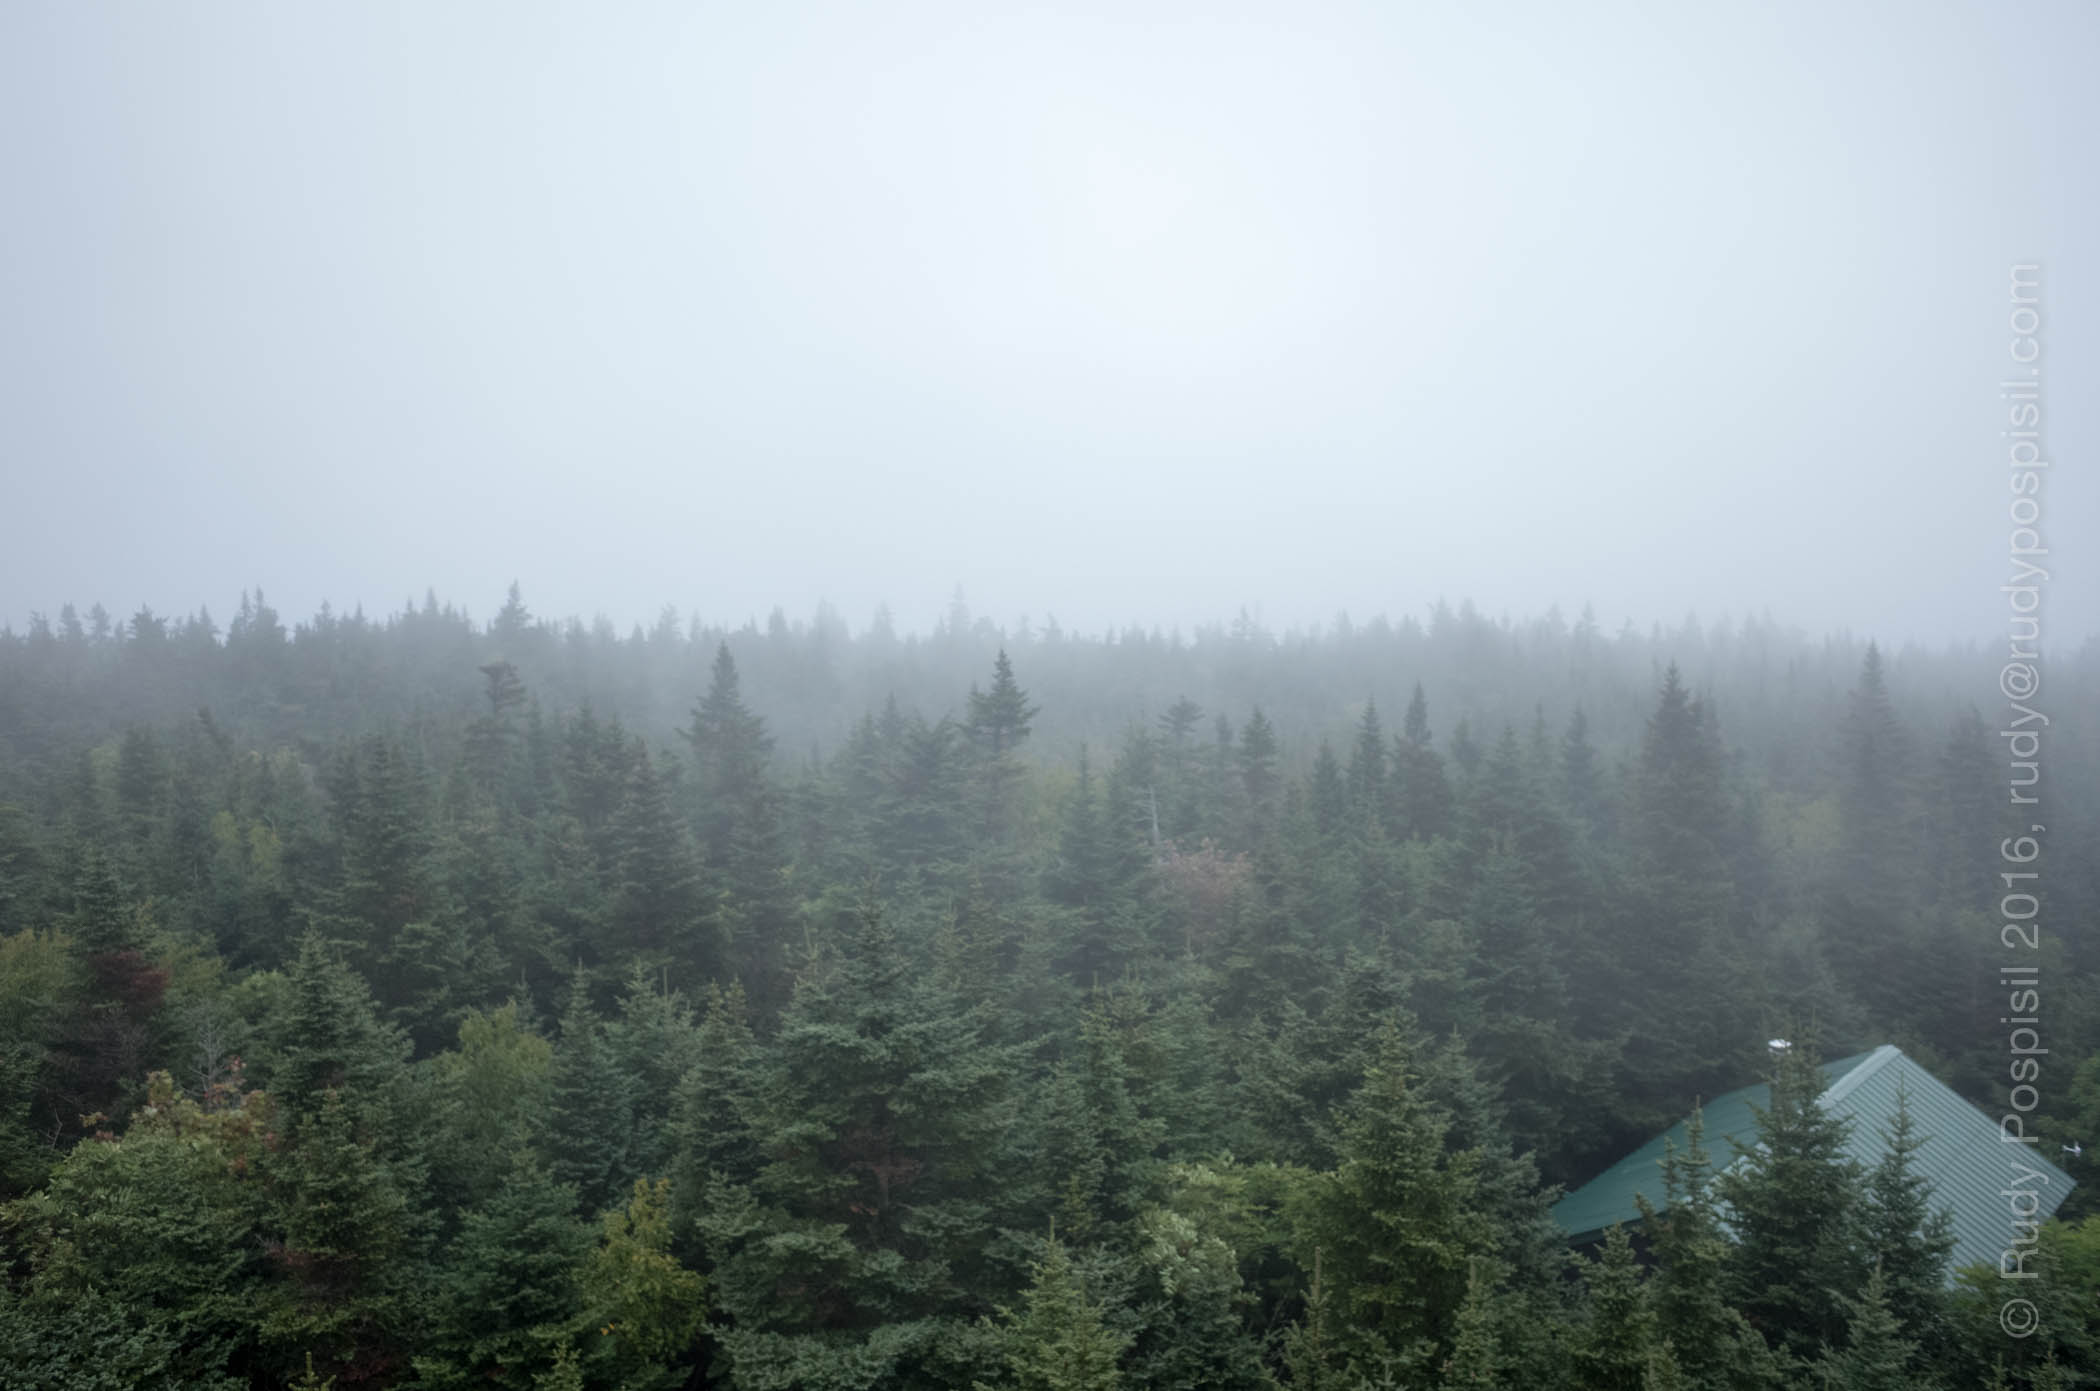 The very foggy view from the fire tower at the top of Balsam Lake Mountain in the Catskills.